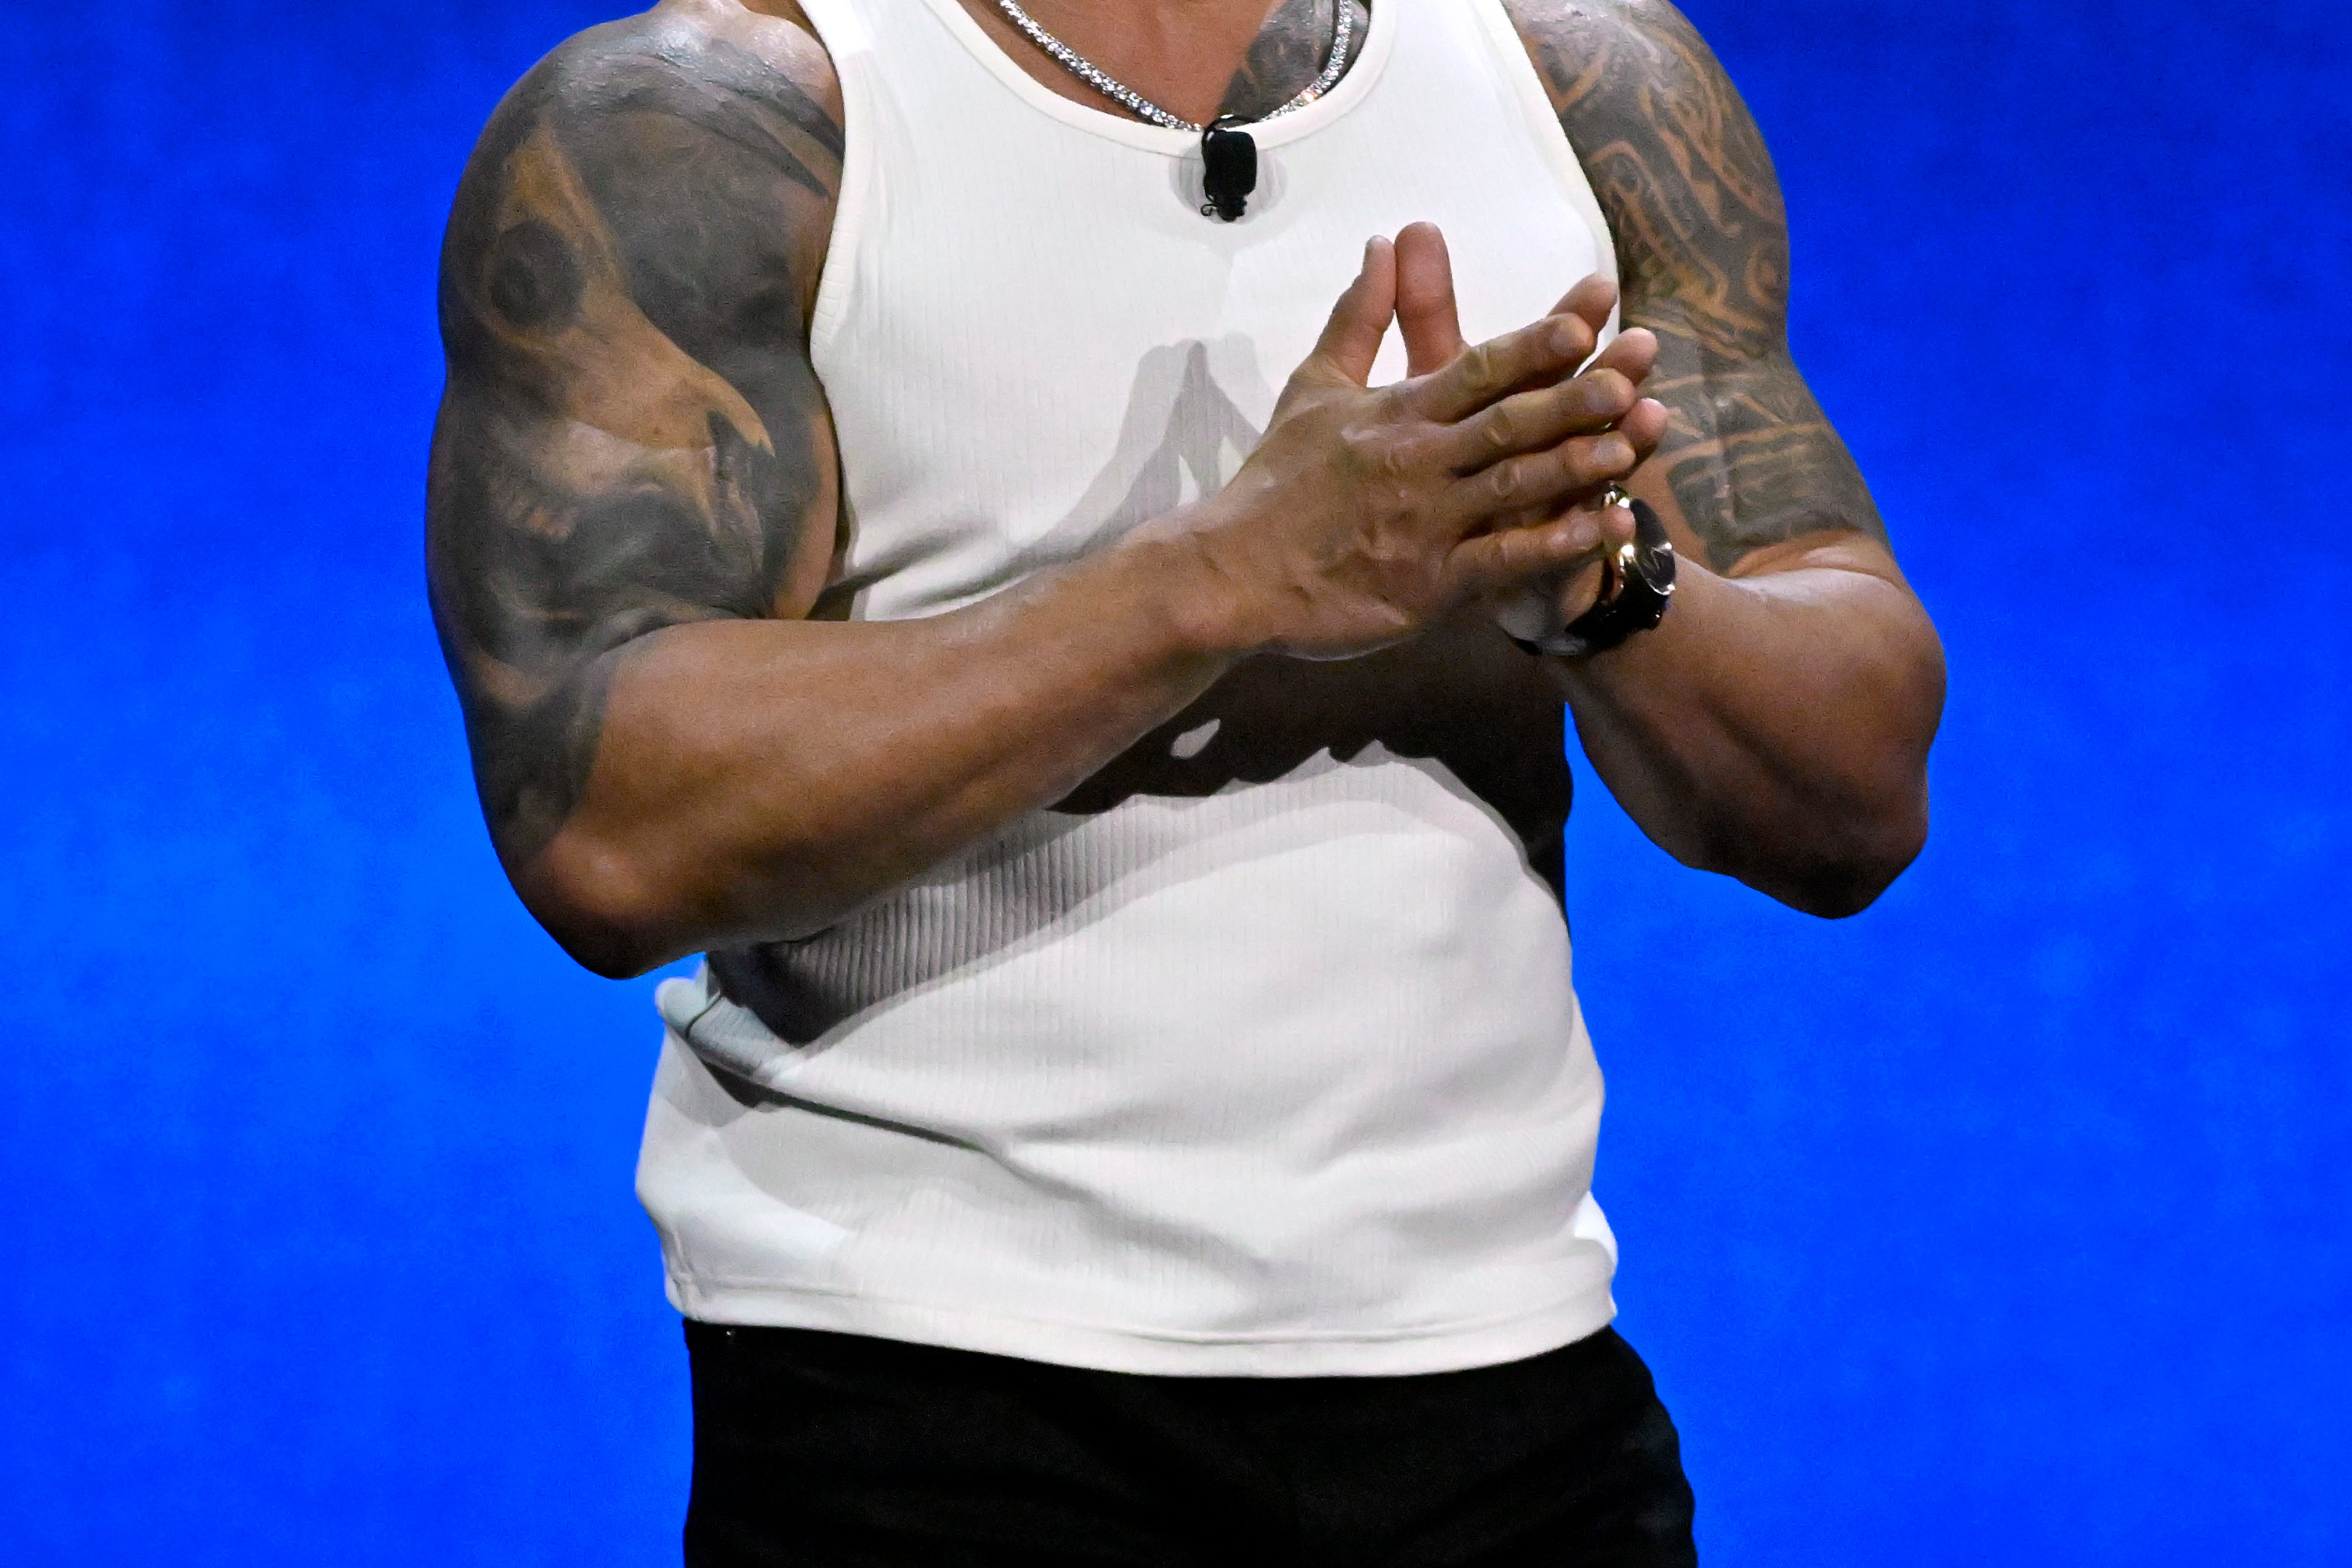 Dwayne "The Rock" Johnson Looks Like A Completely Different Person For His New Movie Role